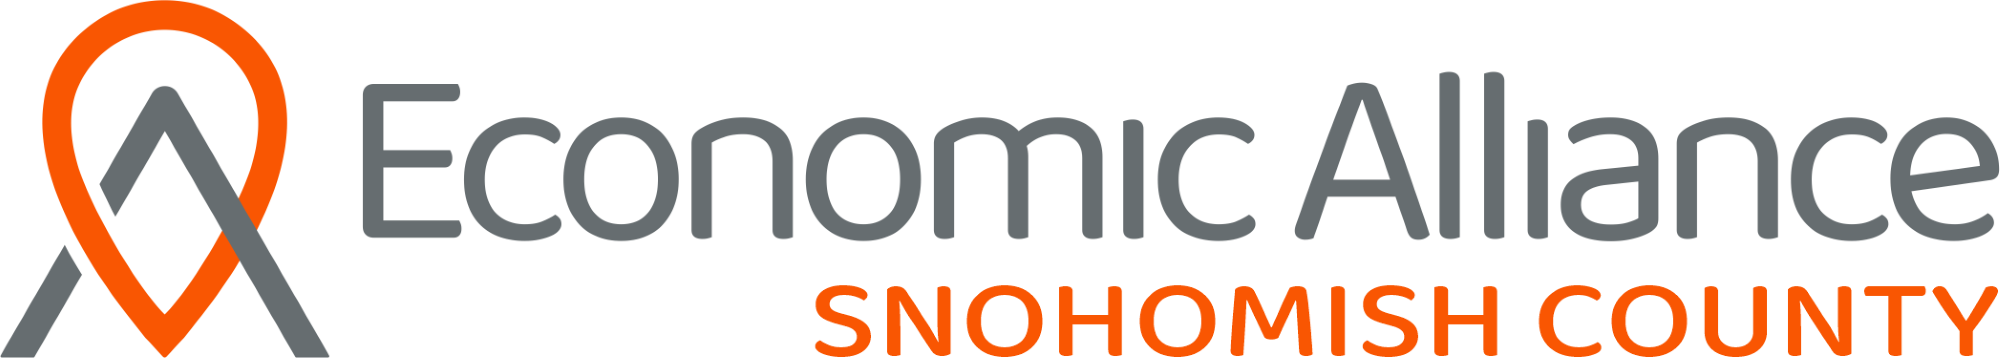 New Staff and Promotions at Economic Alliance Snohomish County (EASC) Photo